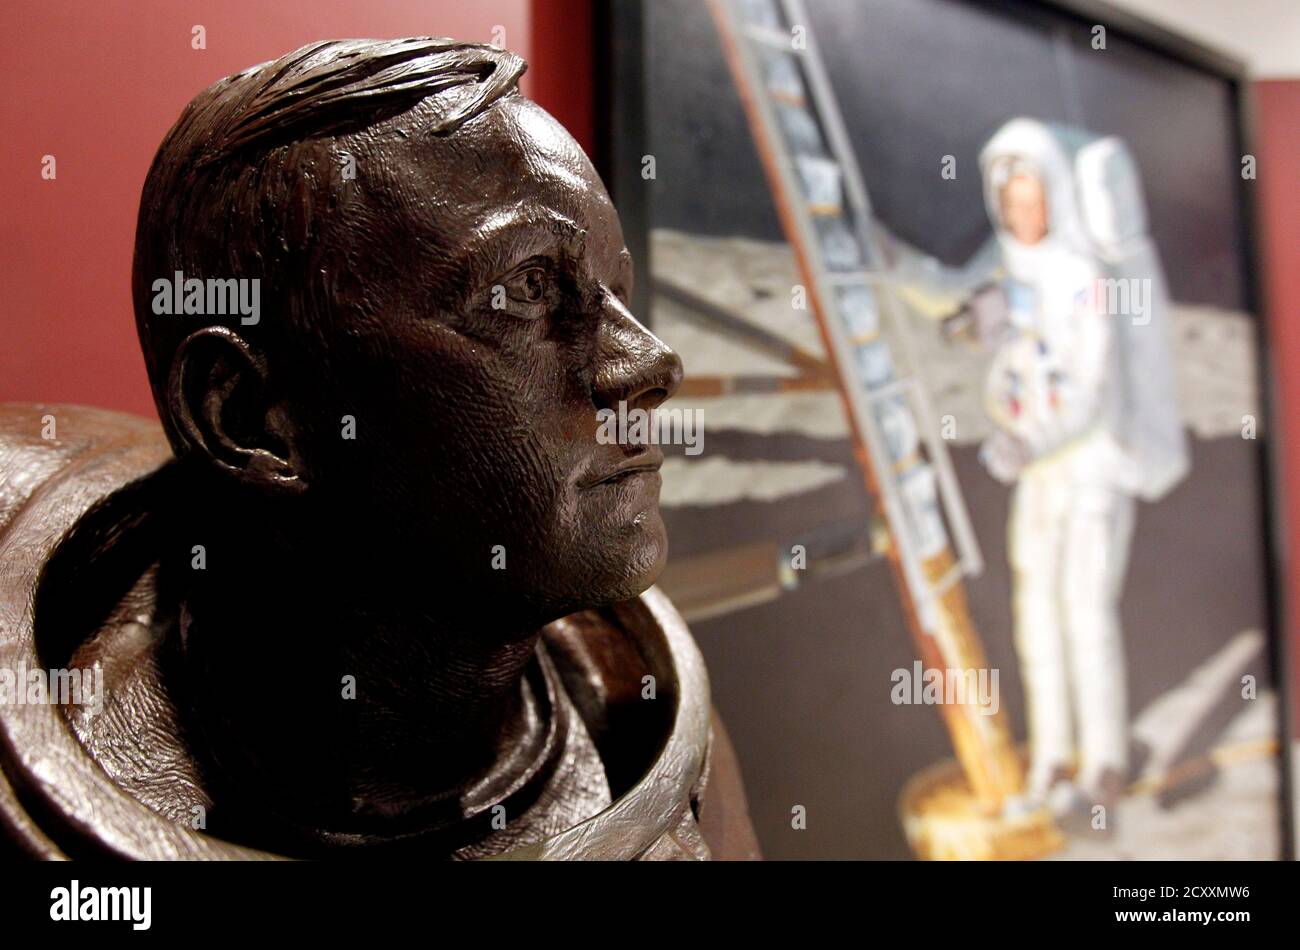 The detail of a bust of Neil Armstrong is seen before a public memorial service for Armstrong at the Armstrong Air and Space Museum in Wapakoneta, Ohio August 29, 2012.  Armstrong, who took a giant leap for mankind when he became the first person to walk on the moon, has died at the age of 82, his family said on Saturday.  REUTERS/Matt Sullivan  (UNITED STATES - Tags: SCIENCE TECHNOLOGY OBITUARY PROFILE) Stock Photo